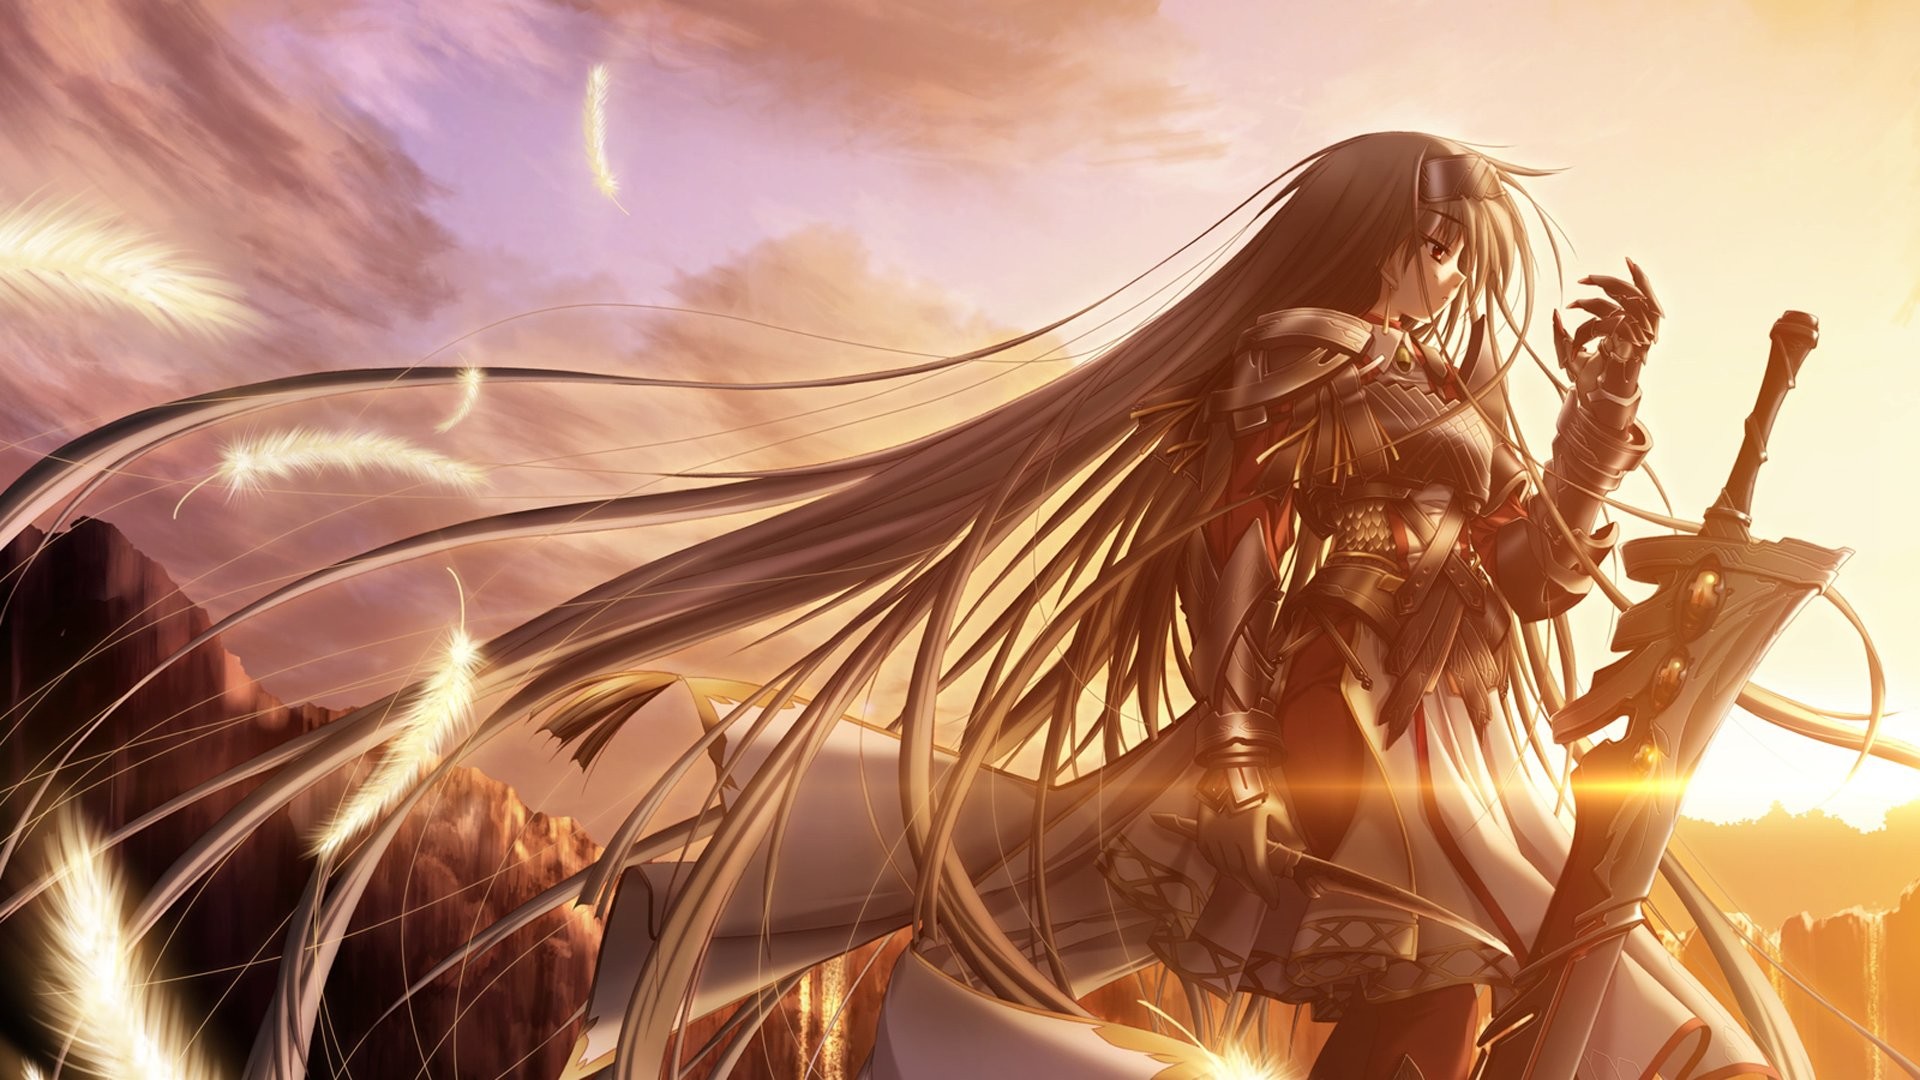 1920x1080 anime wallpaper hd, 061546778, 272 Wallpapers HD / Desktop and Mobile  Backgrounds